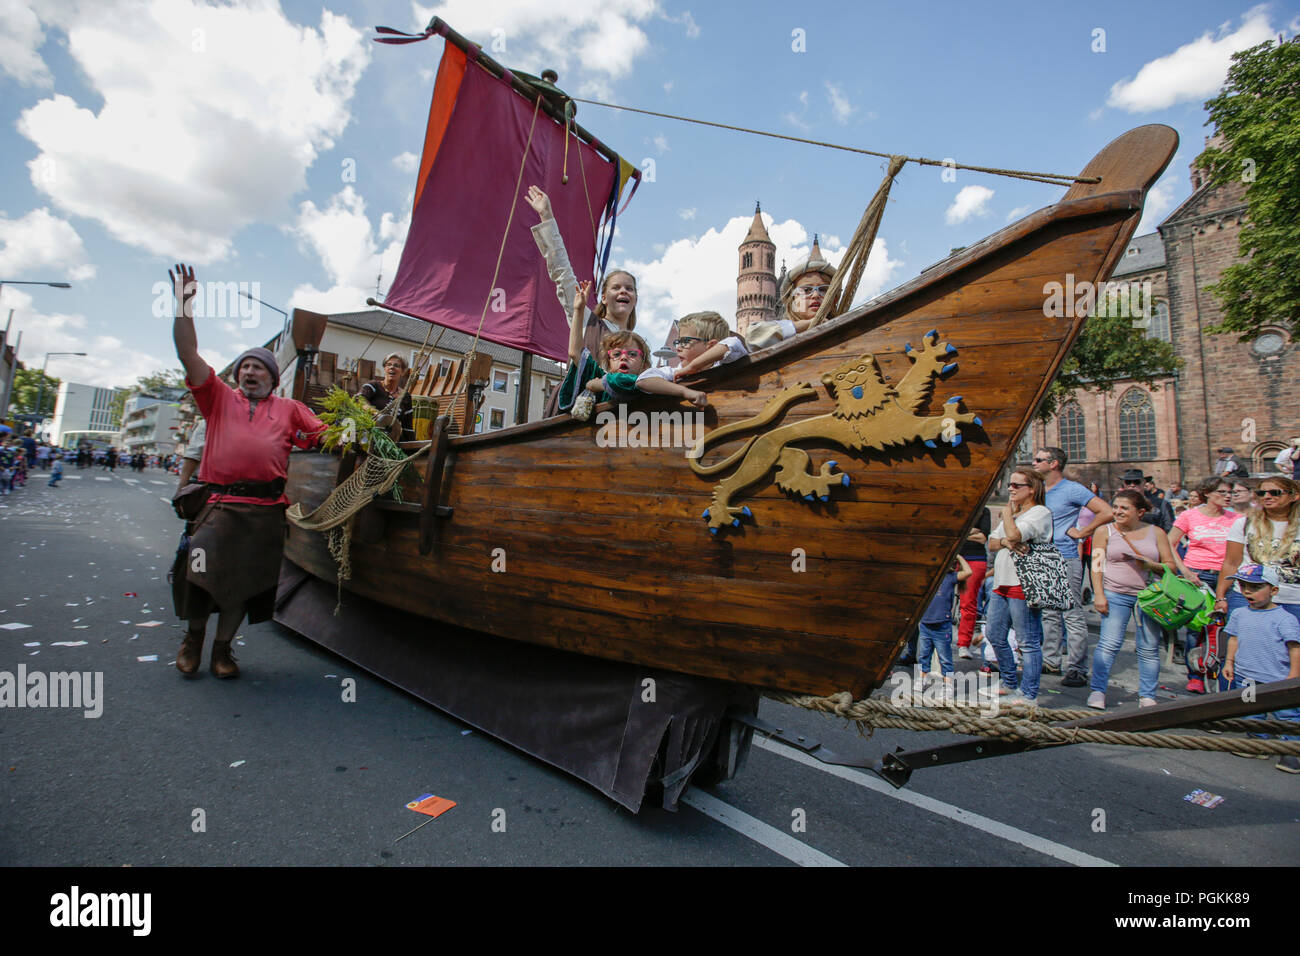 Worms, Germany. 26th Aug, 2018. People in medieval costumes ride in a boat in the parade. The first highlight of the 2018 Backfischfest was the big parade through the city of Worms with over 70 groups and floats. Community groups, music groups and businesses from Worms and further afield took part. Credit: Michael Debets/Pacific Press/Alamy Live News Stock Photo